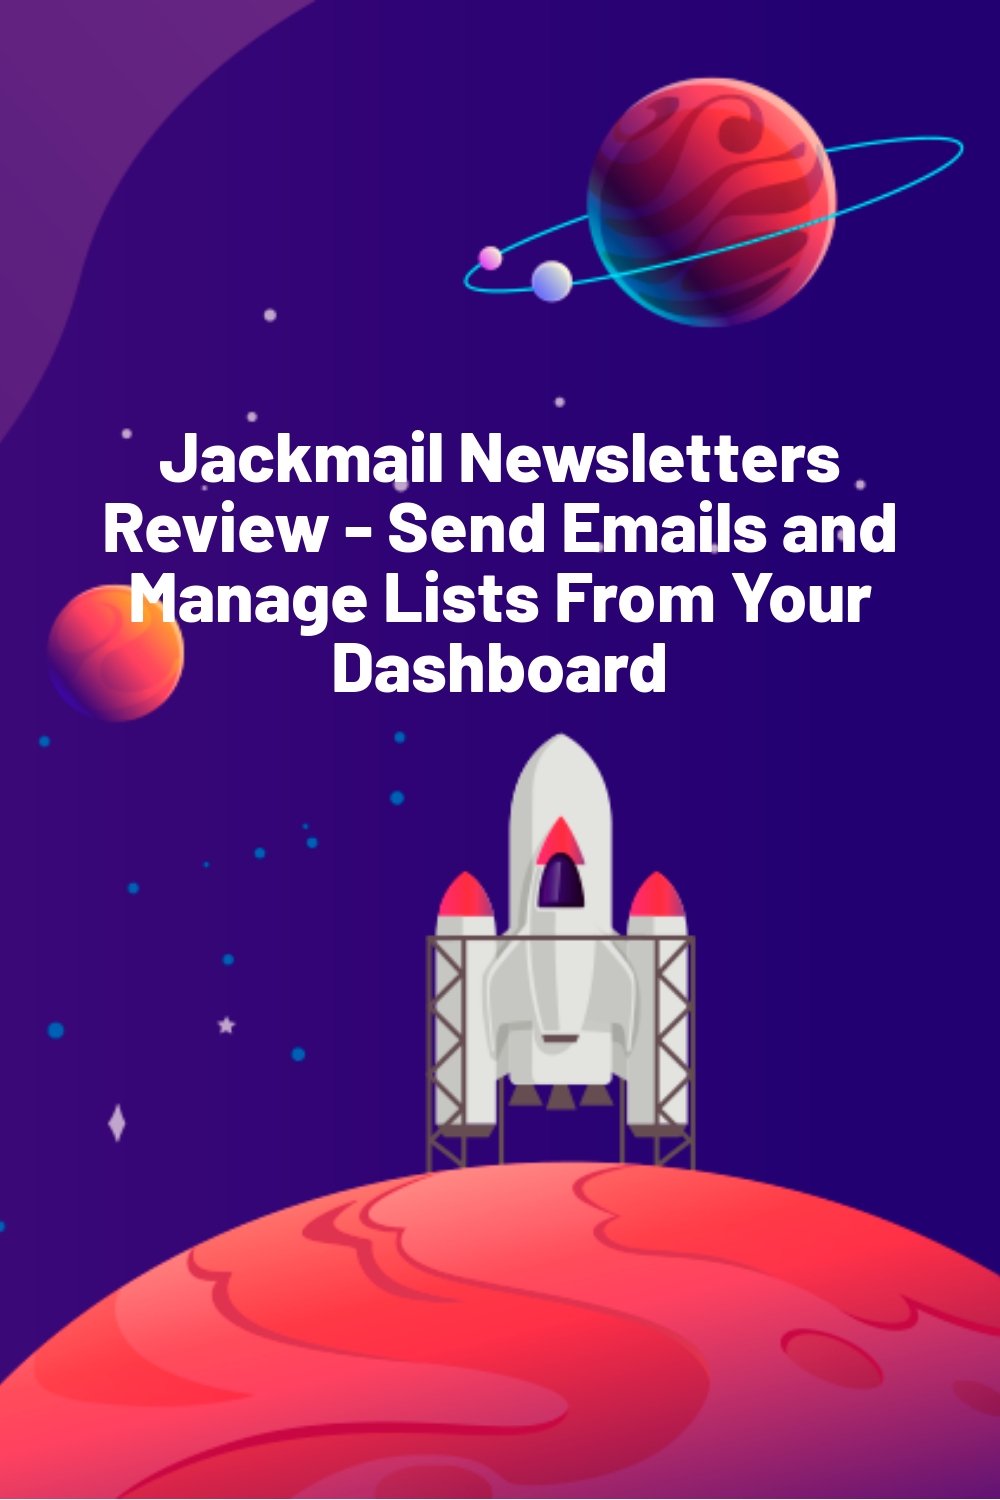 Jackmail Newsletters Review – Send Emails and Manage Lists From Your Dashboard